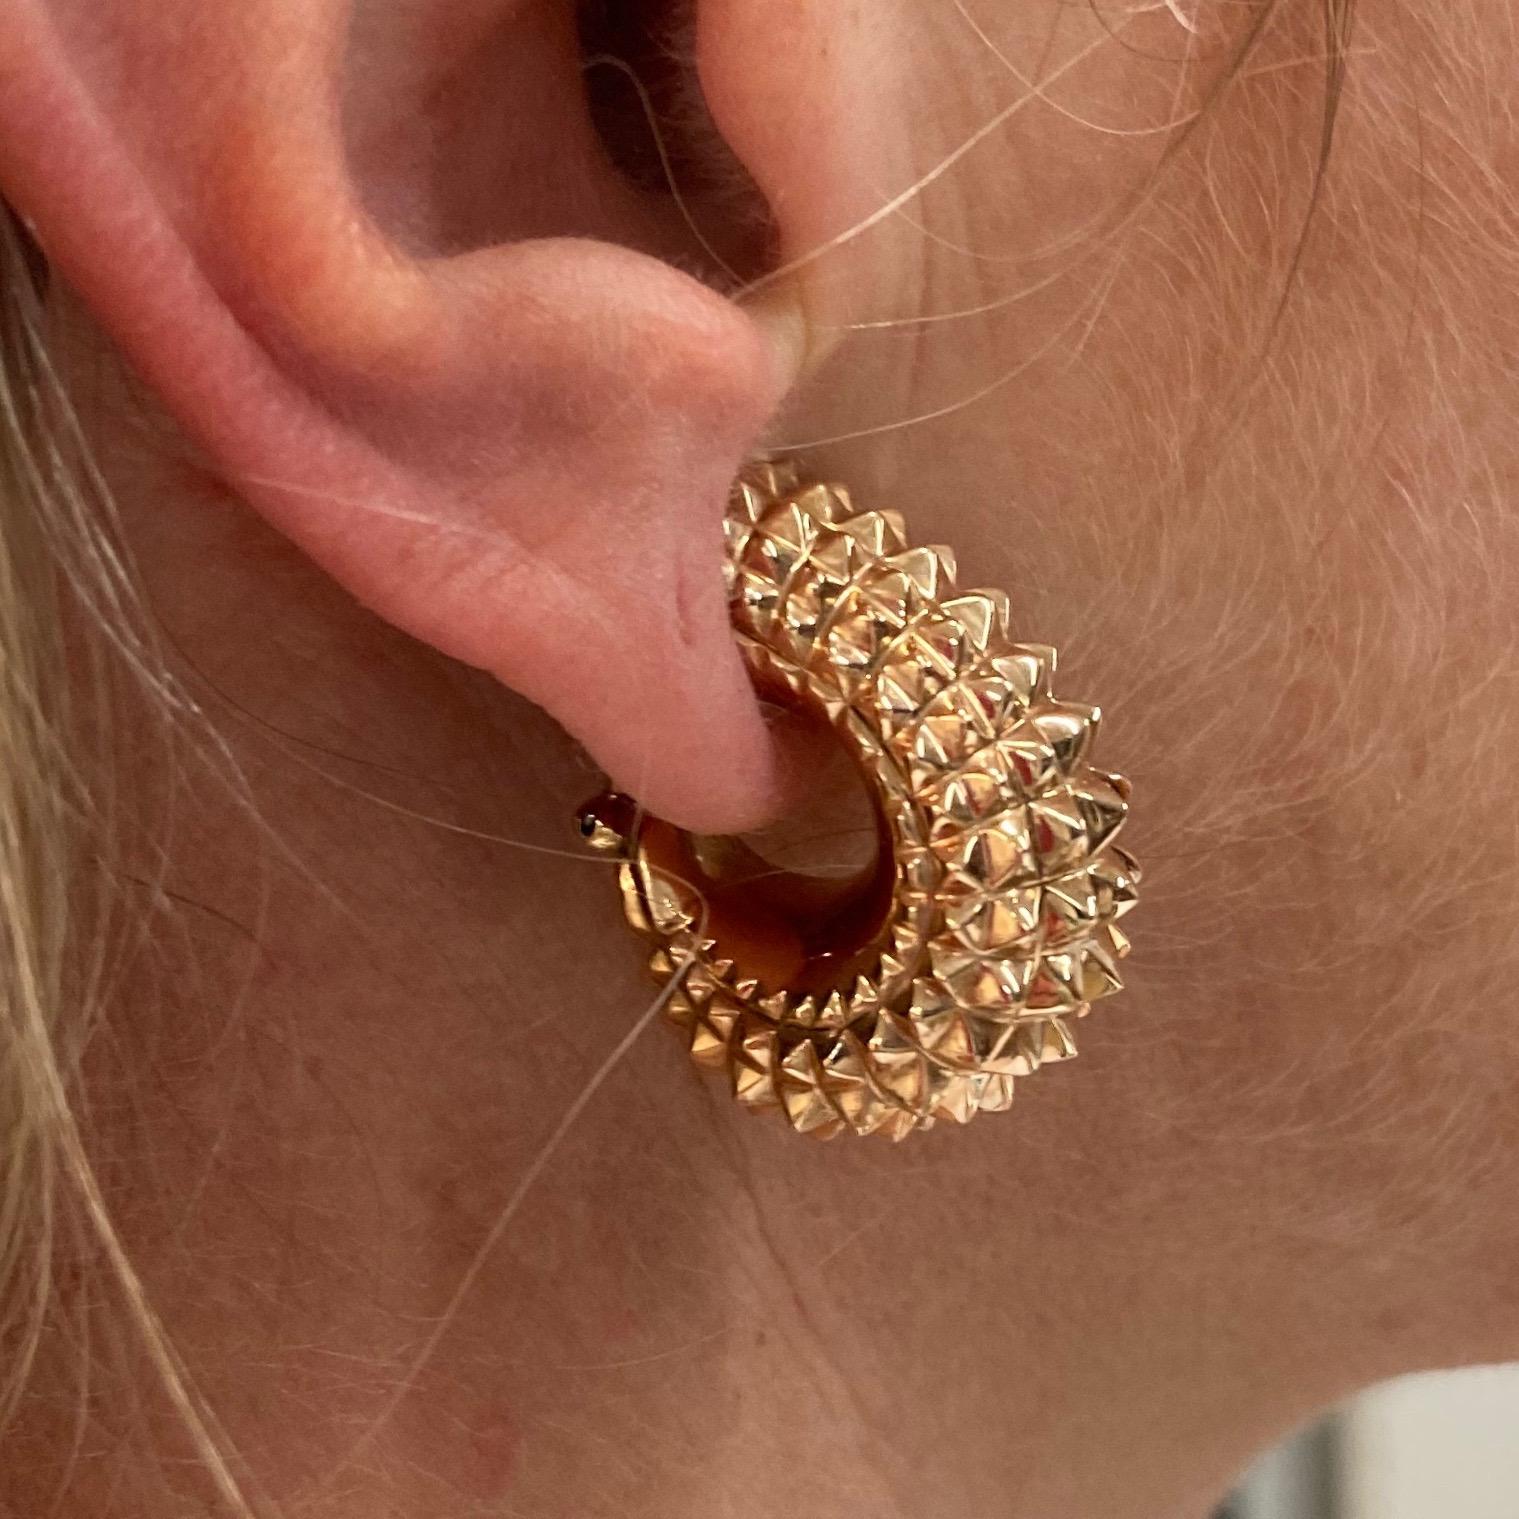 This exclusivly handmade extravagant 3 dimansional Earclips in 18 Kt Rose Gold by the well known swiss company sueños convince and fascinate with a unique Pyramid pattern and createa a lively light and shadow contrast.
The perfect piece of jewelery